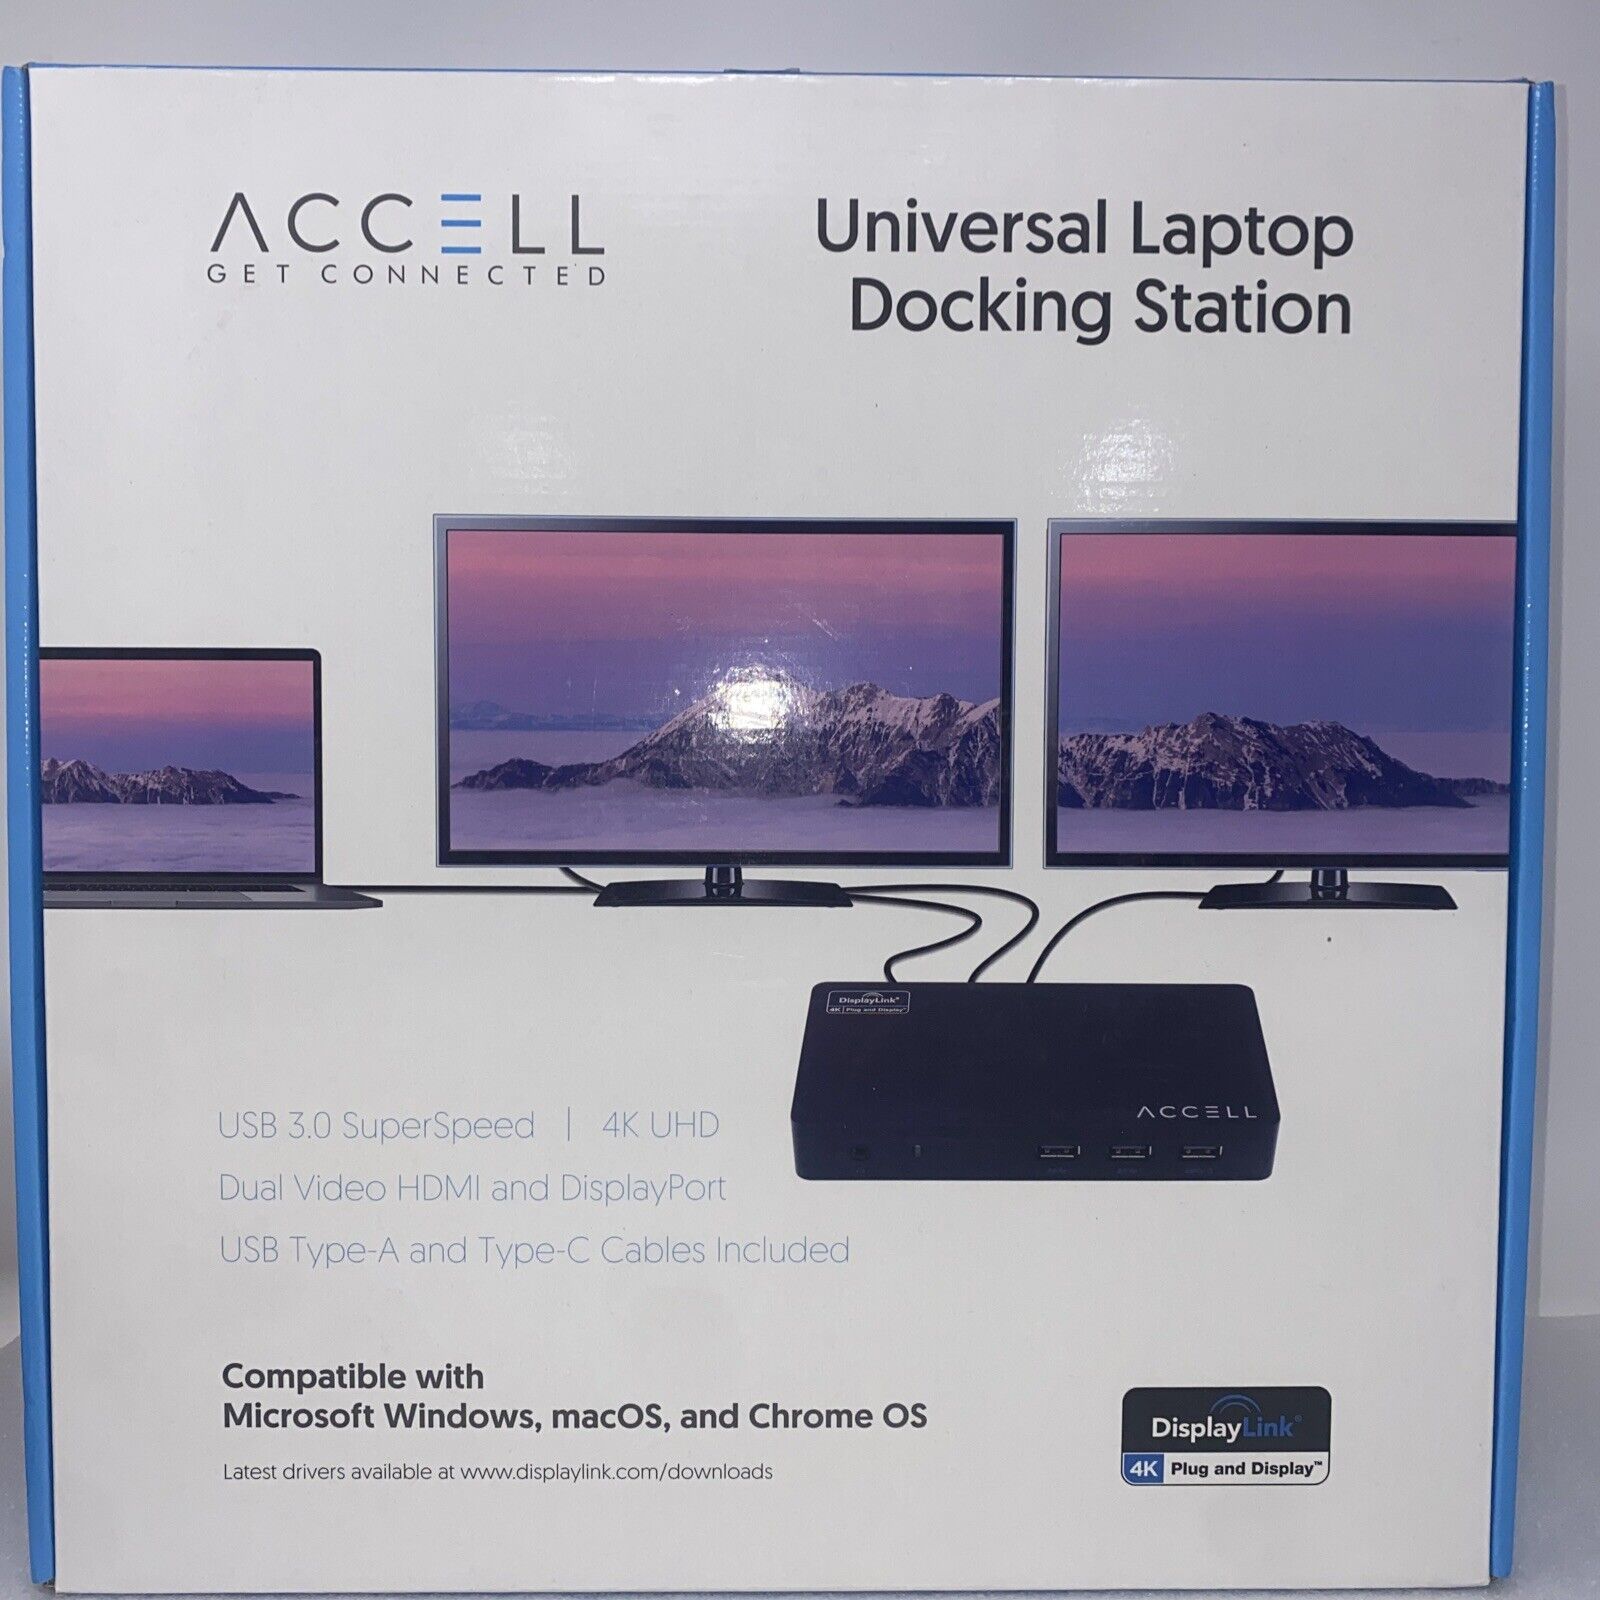 NEW UNIVERSAL LAPTOP Docking Station by Accell 4k Plug & Display USB 3.0 4k UHD